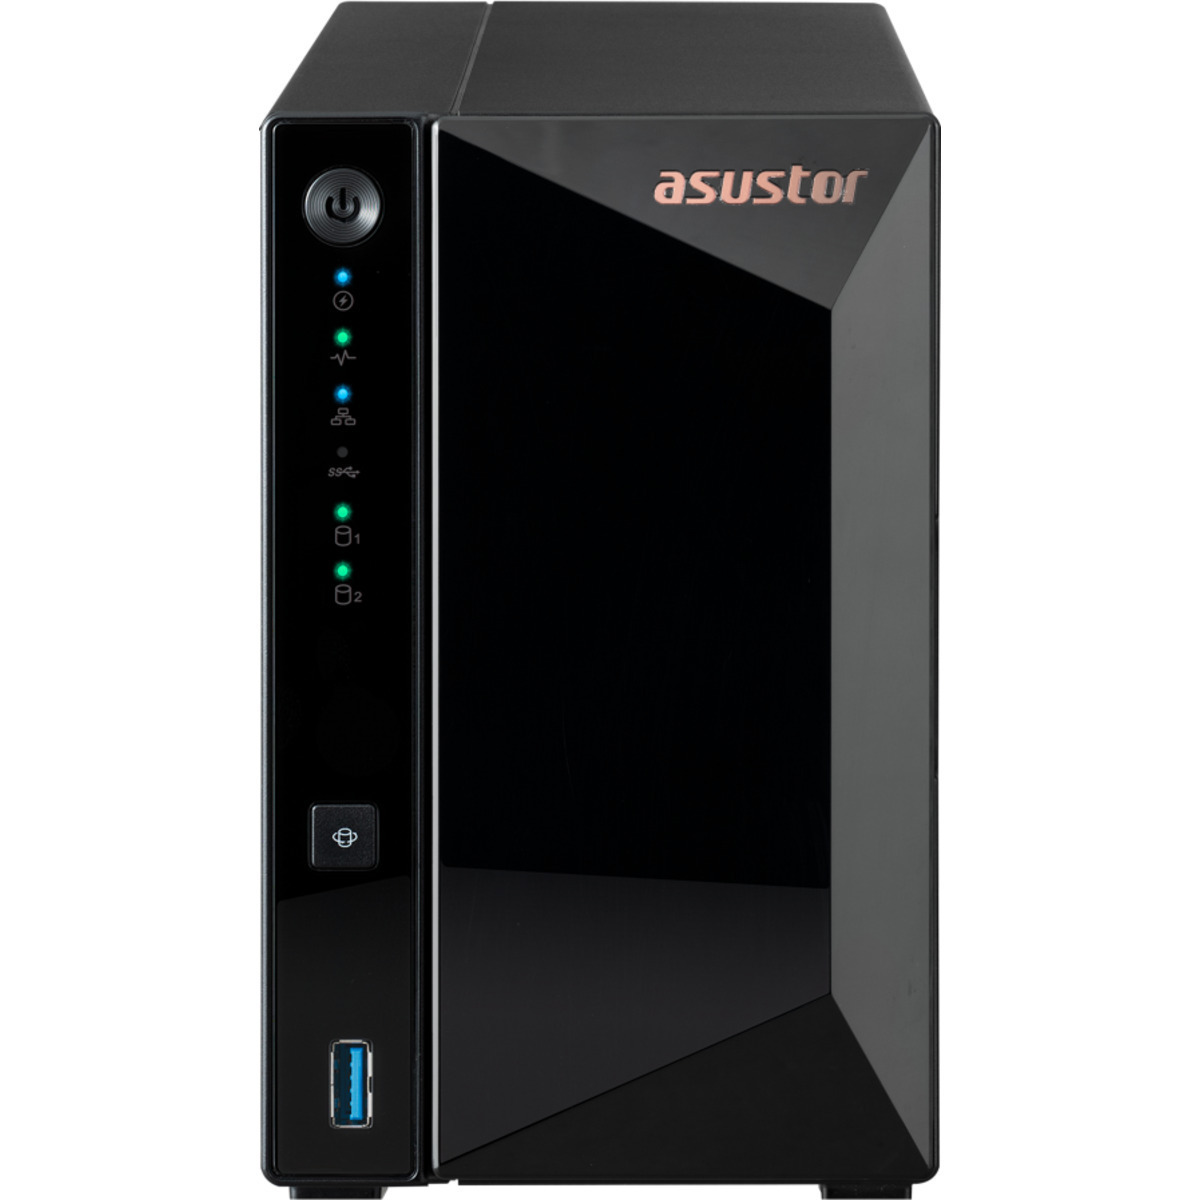 ASUSTOR DRIVESTOR 2 Pro Gen2 AS3302T v2 16tb 2-Bay Desktop Personal / Basic Home / Small Office NAS - Network Attached Storage Device 1x16tb Seagate IronWolf Pro ST16000NT001 3.5 7200rpm SATA 6Gb/s HDD NAS Class Drives Installed - Burn-In Tested - ON SALE DRIVESTOR 2 Pro Gen2 AS3302T v2